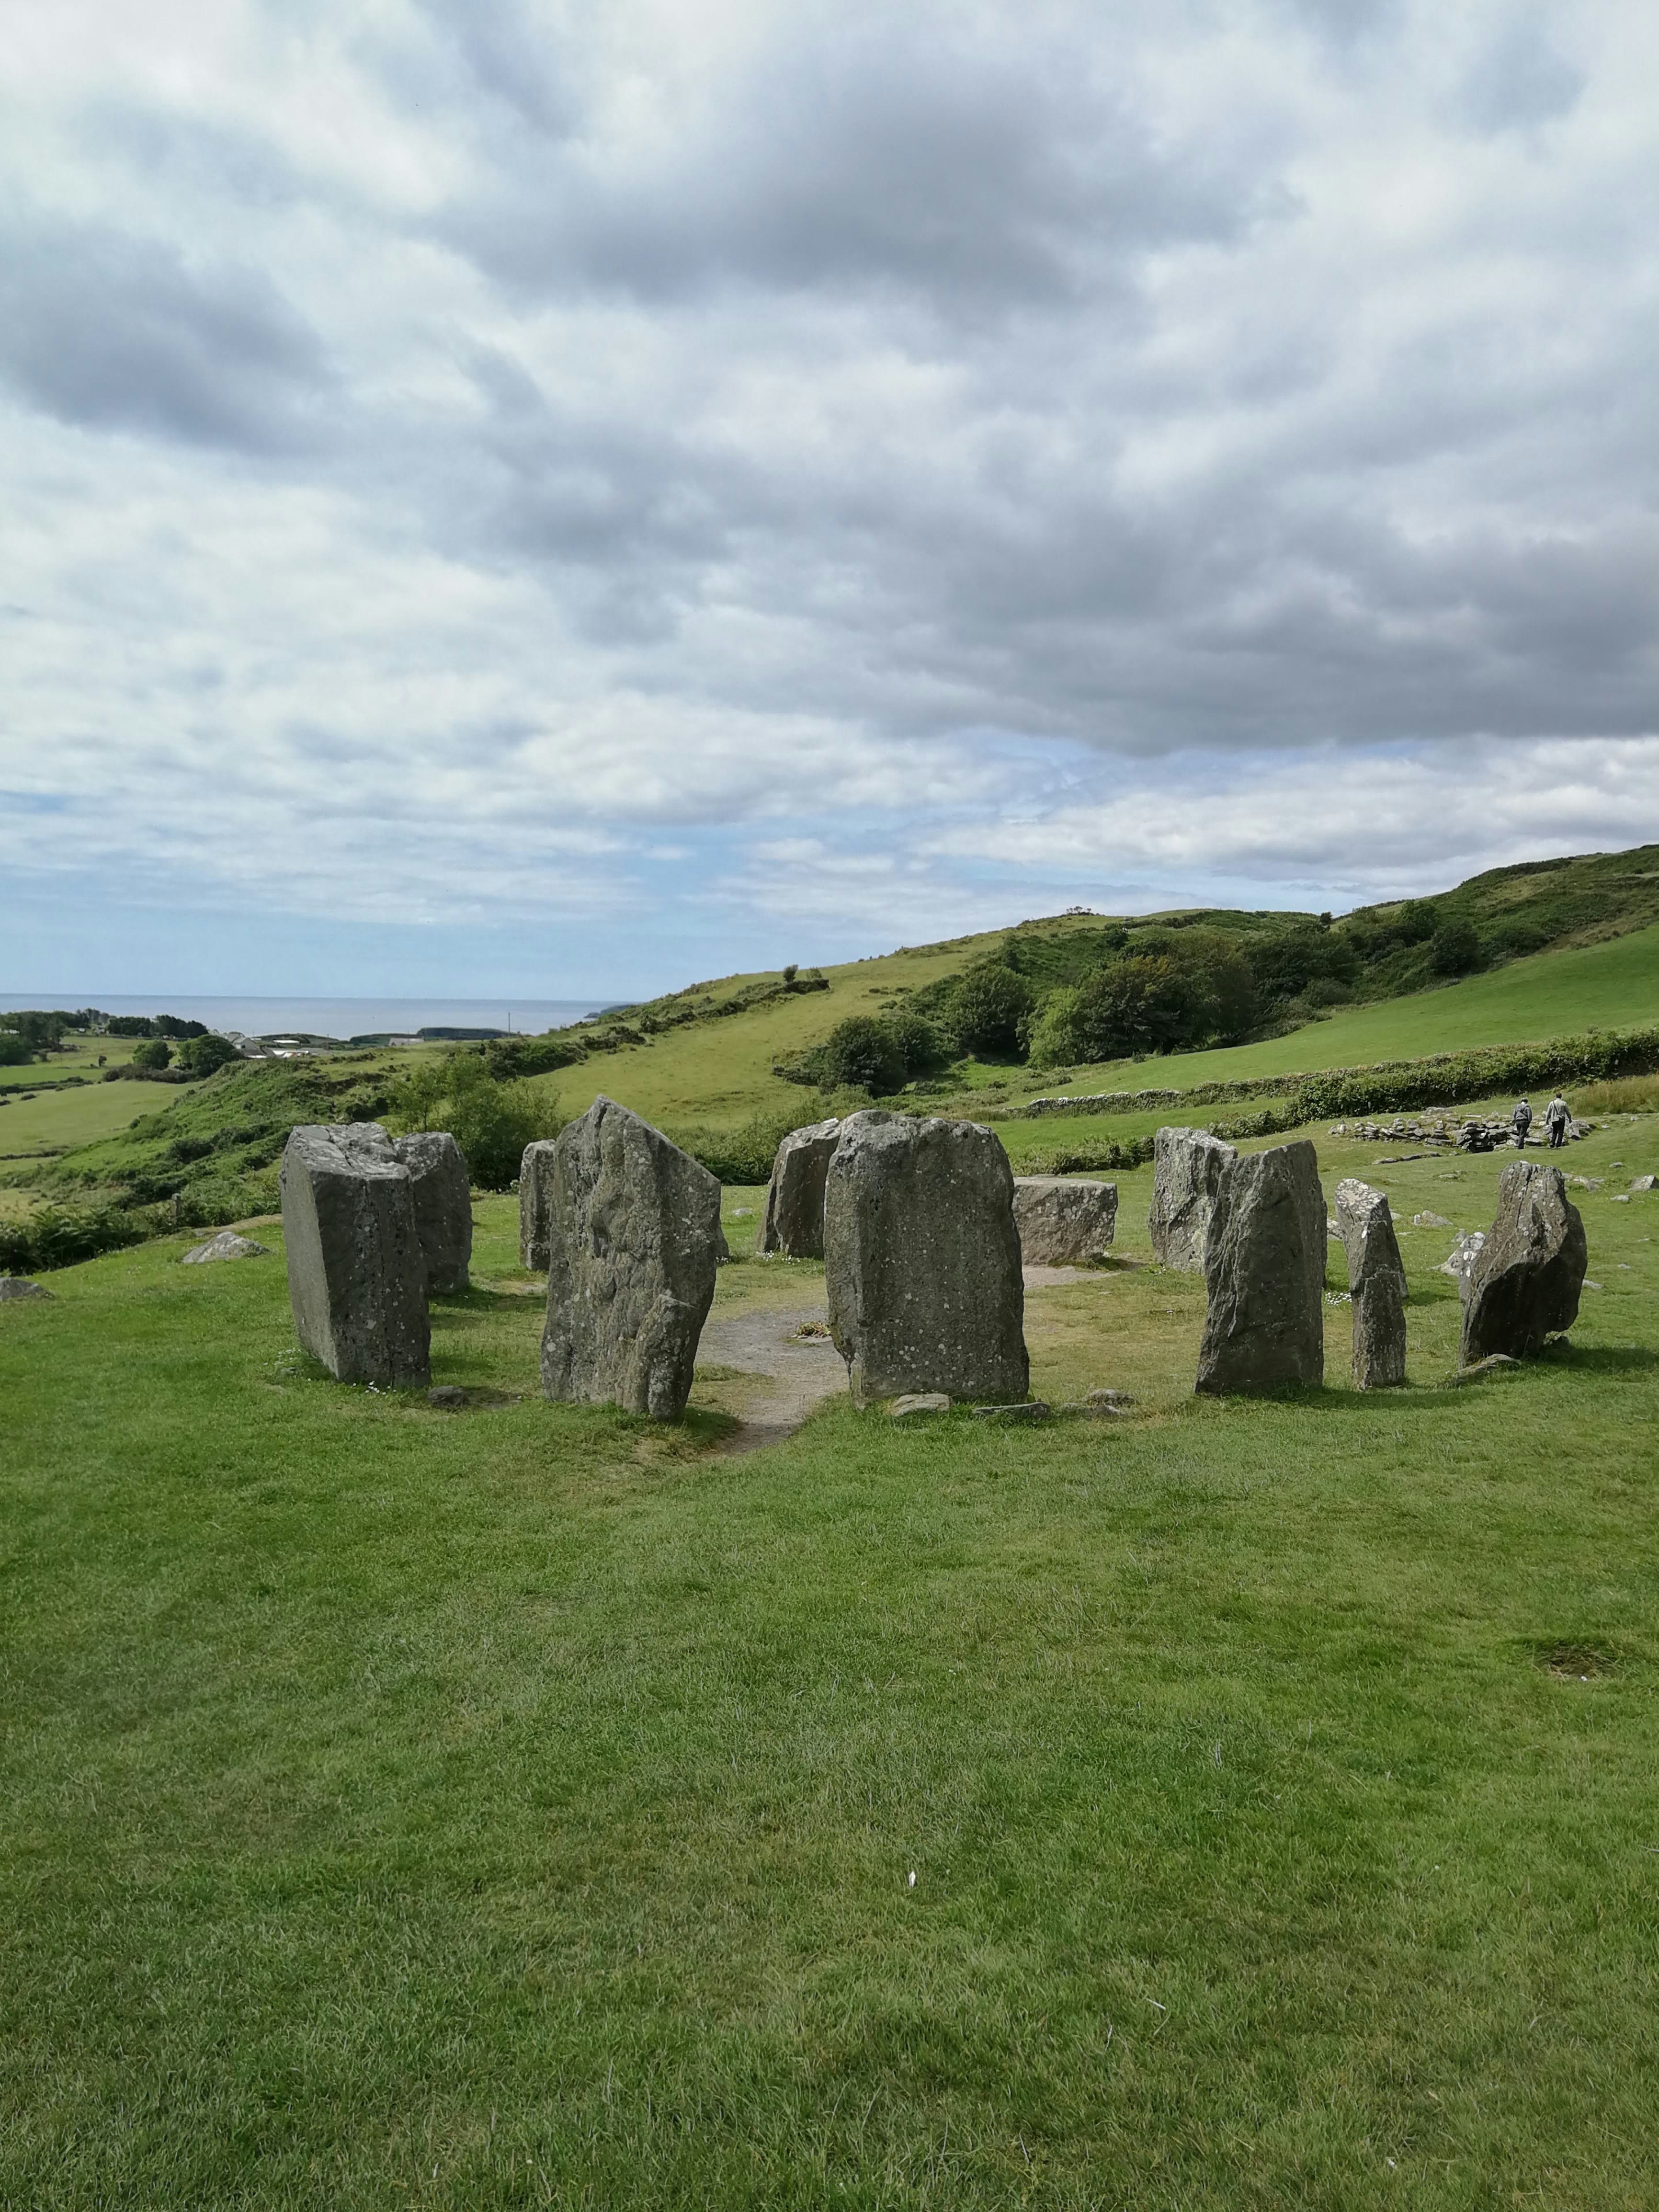 Standing on a grassy hill, with the sea just visible in the distance, is a collection of ancient standing stones, arranged in a circle.